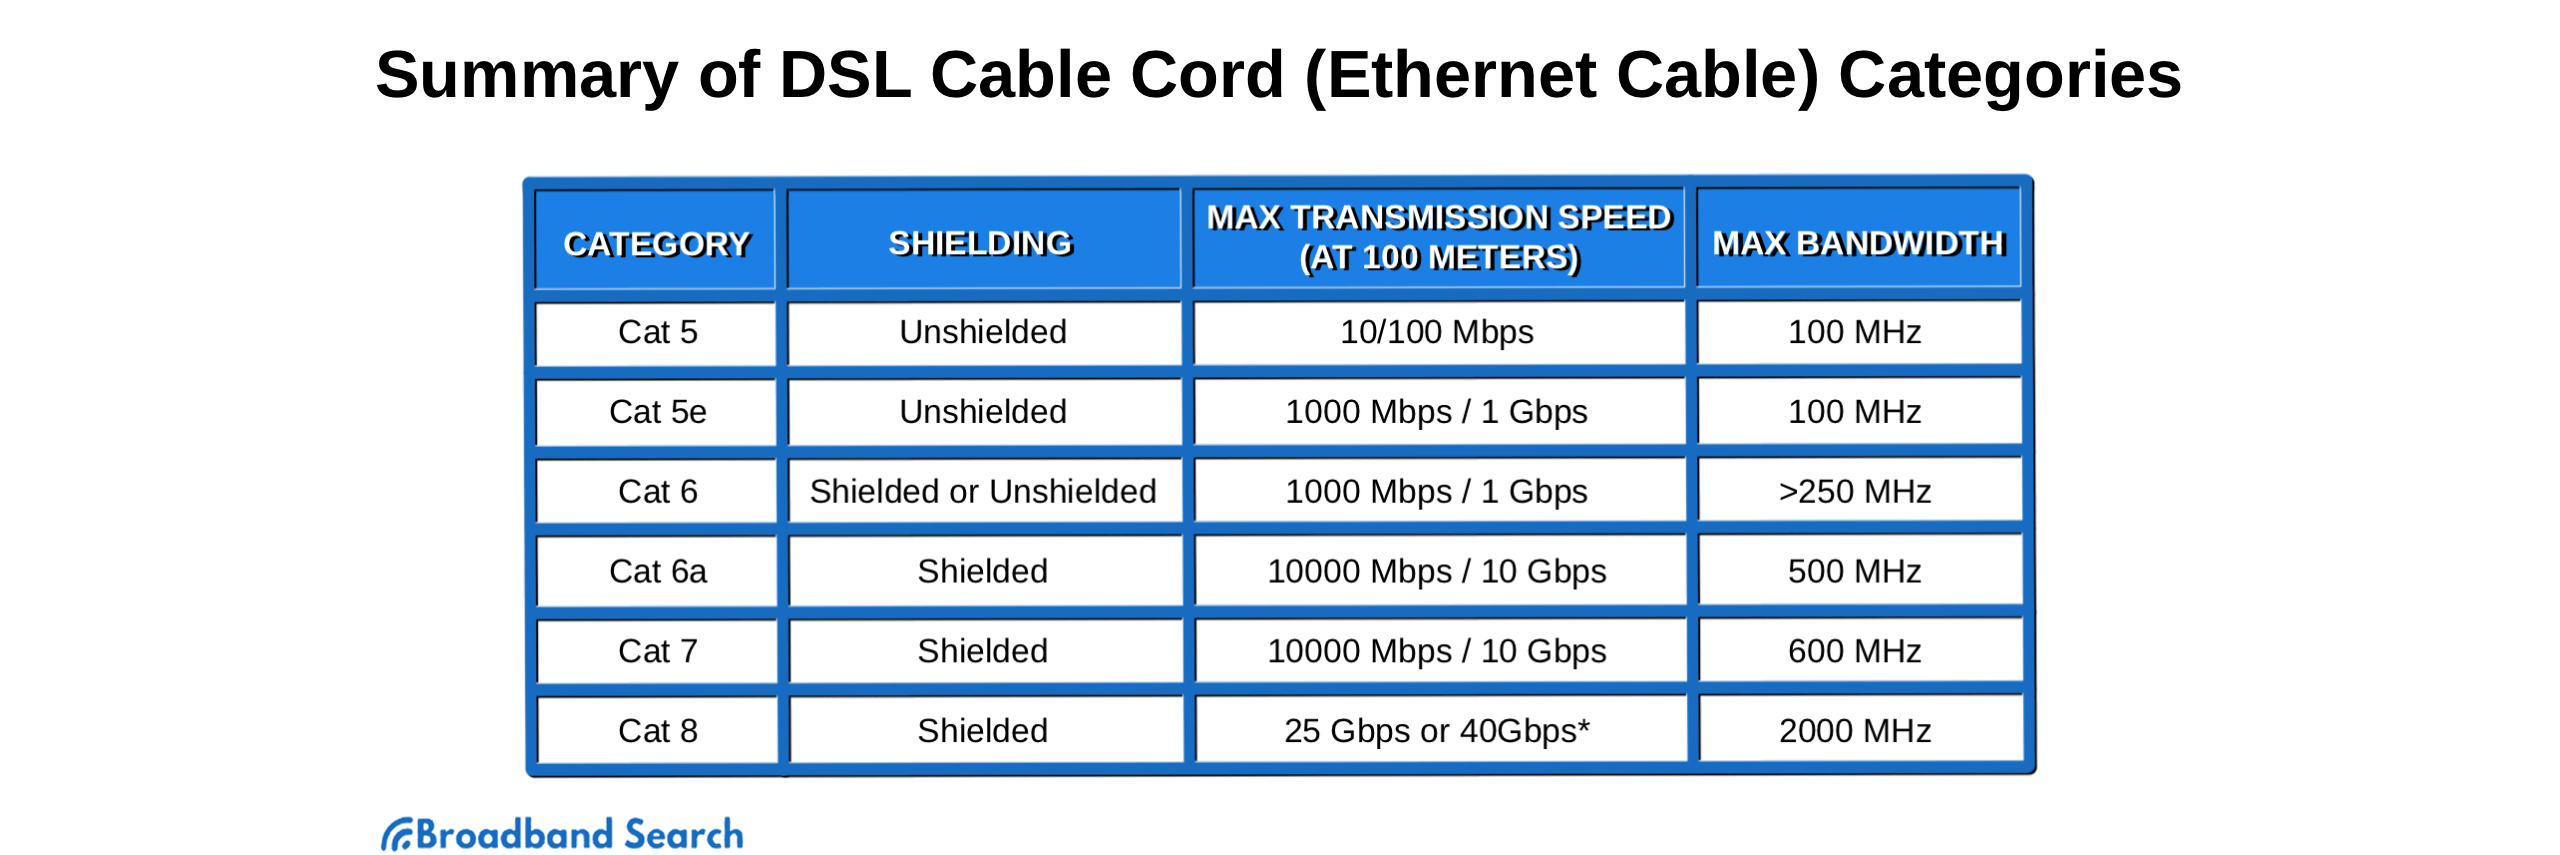 How to Choose a DSL Cable Cord - BroadbandSearch